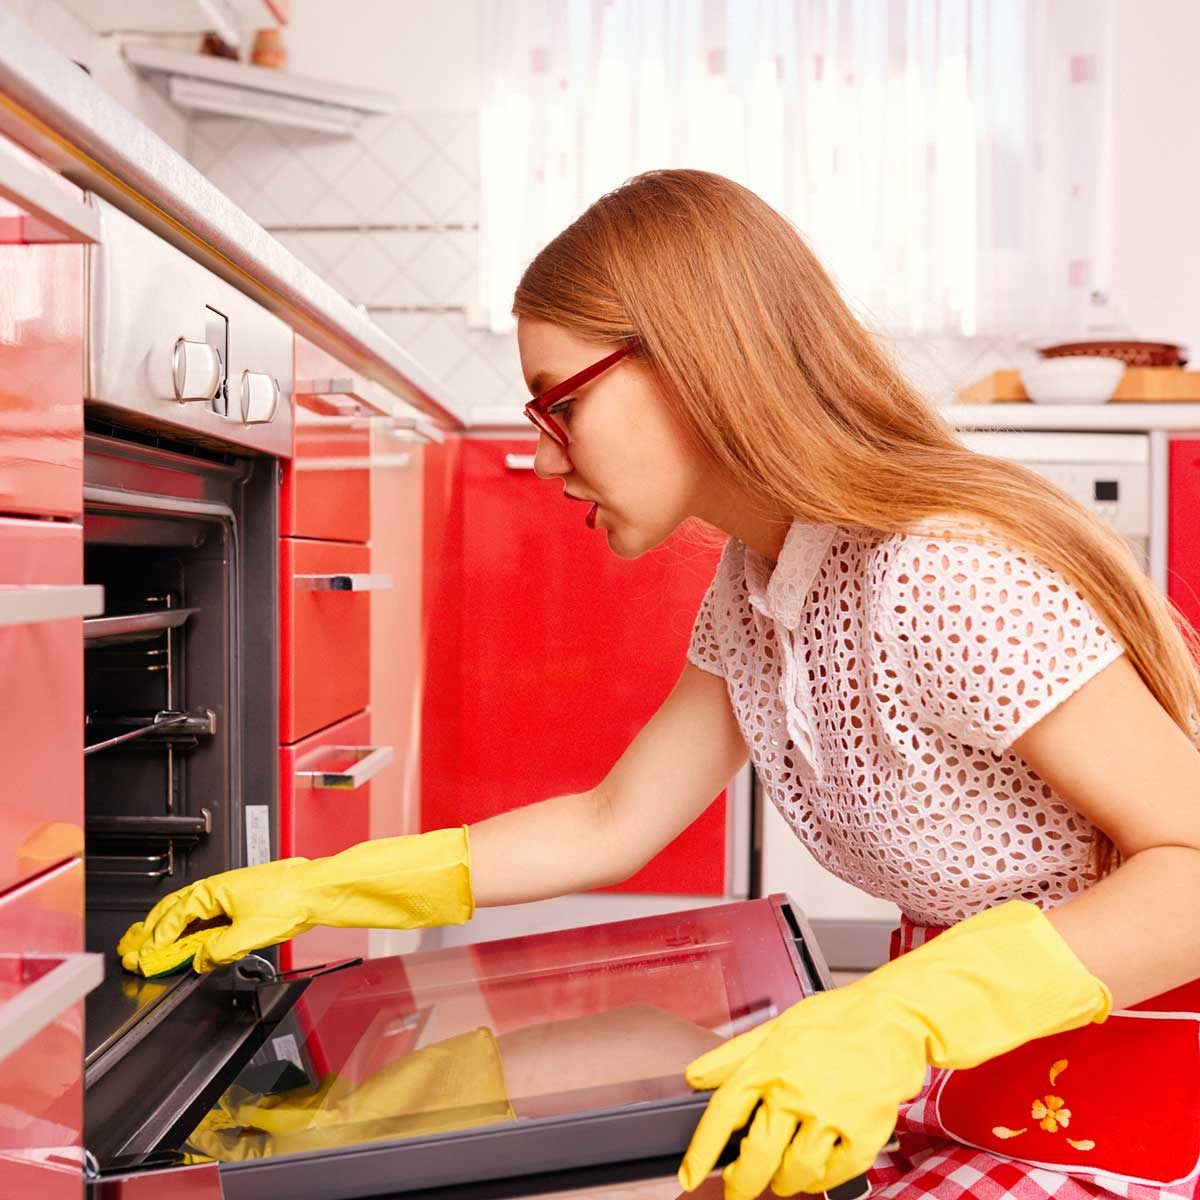 Cleaning an Oven With Baking Soda and Vinegar